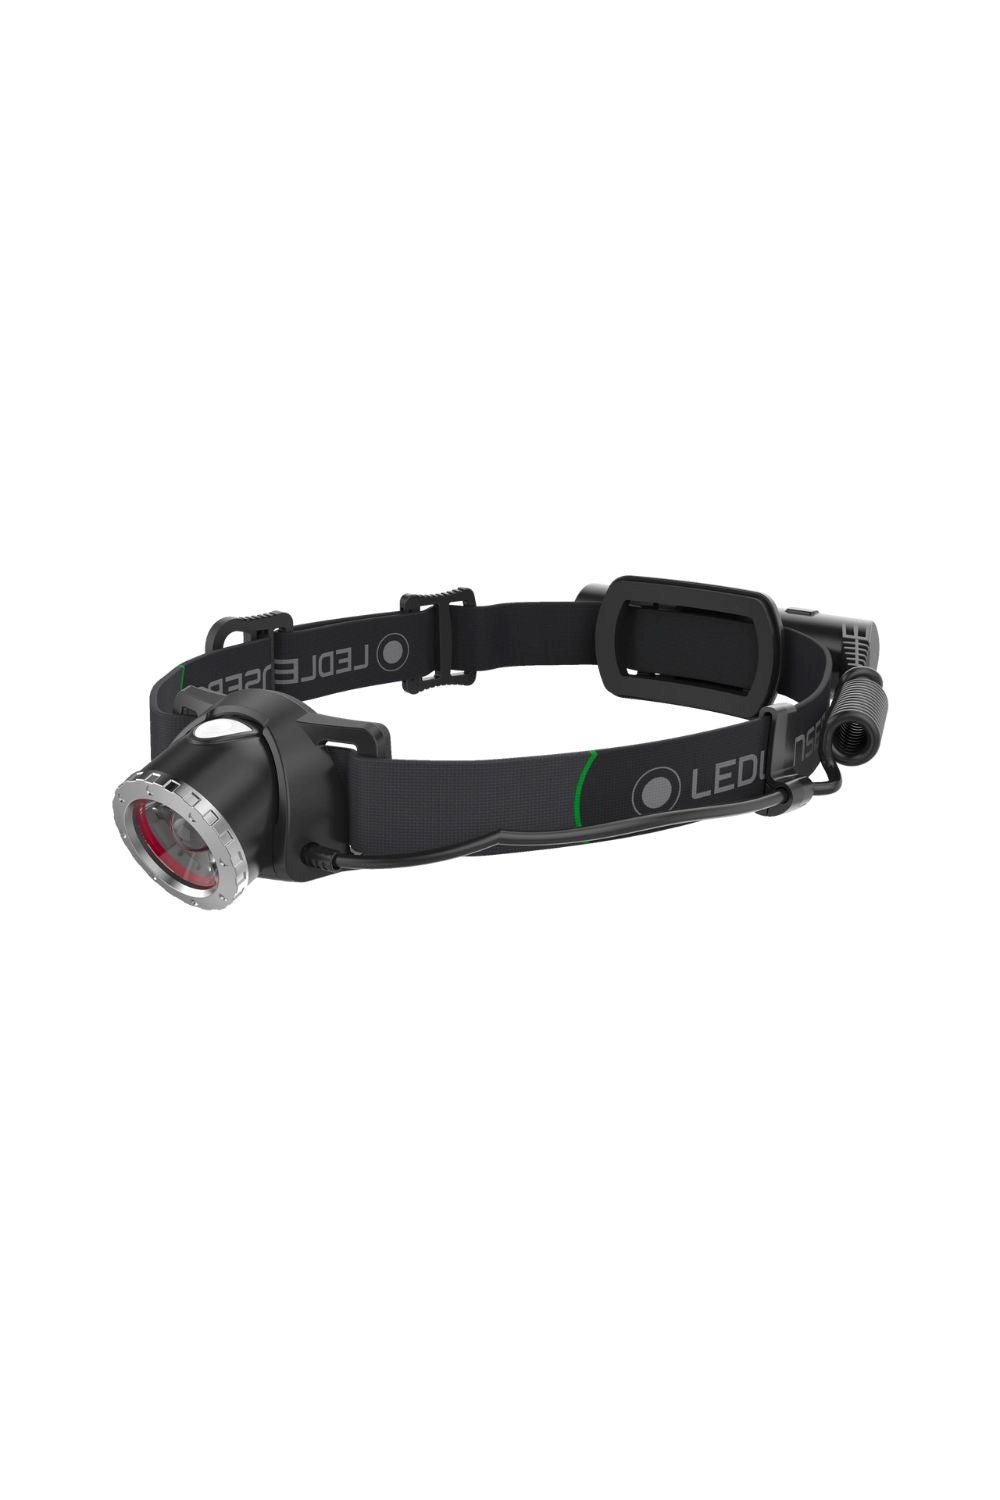 Mh10 Rechargeable Outdoor Led Head Torch -